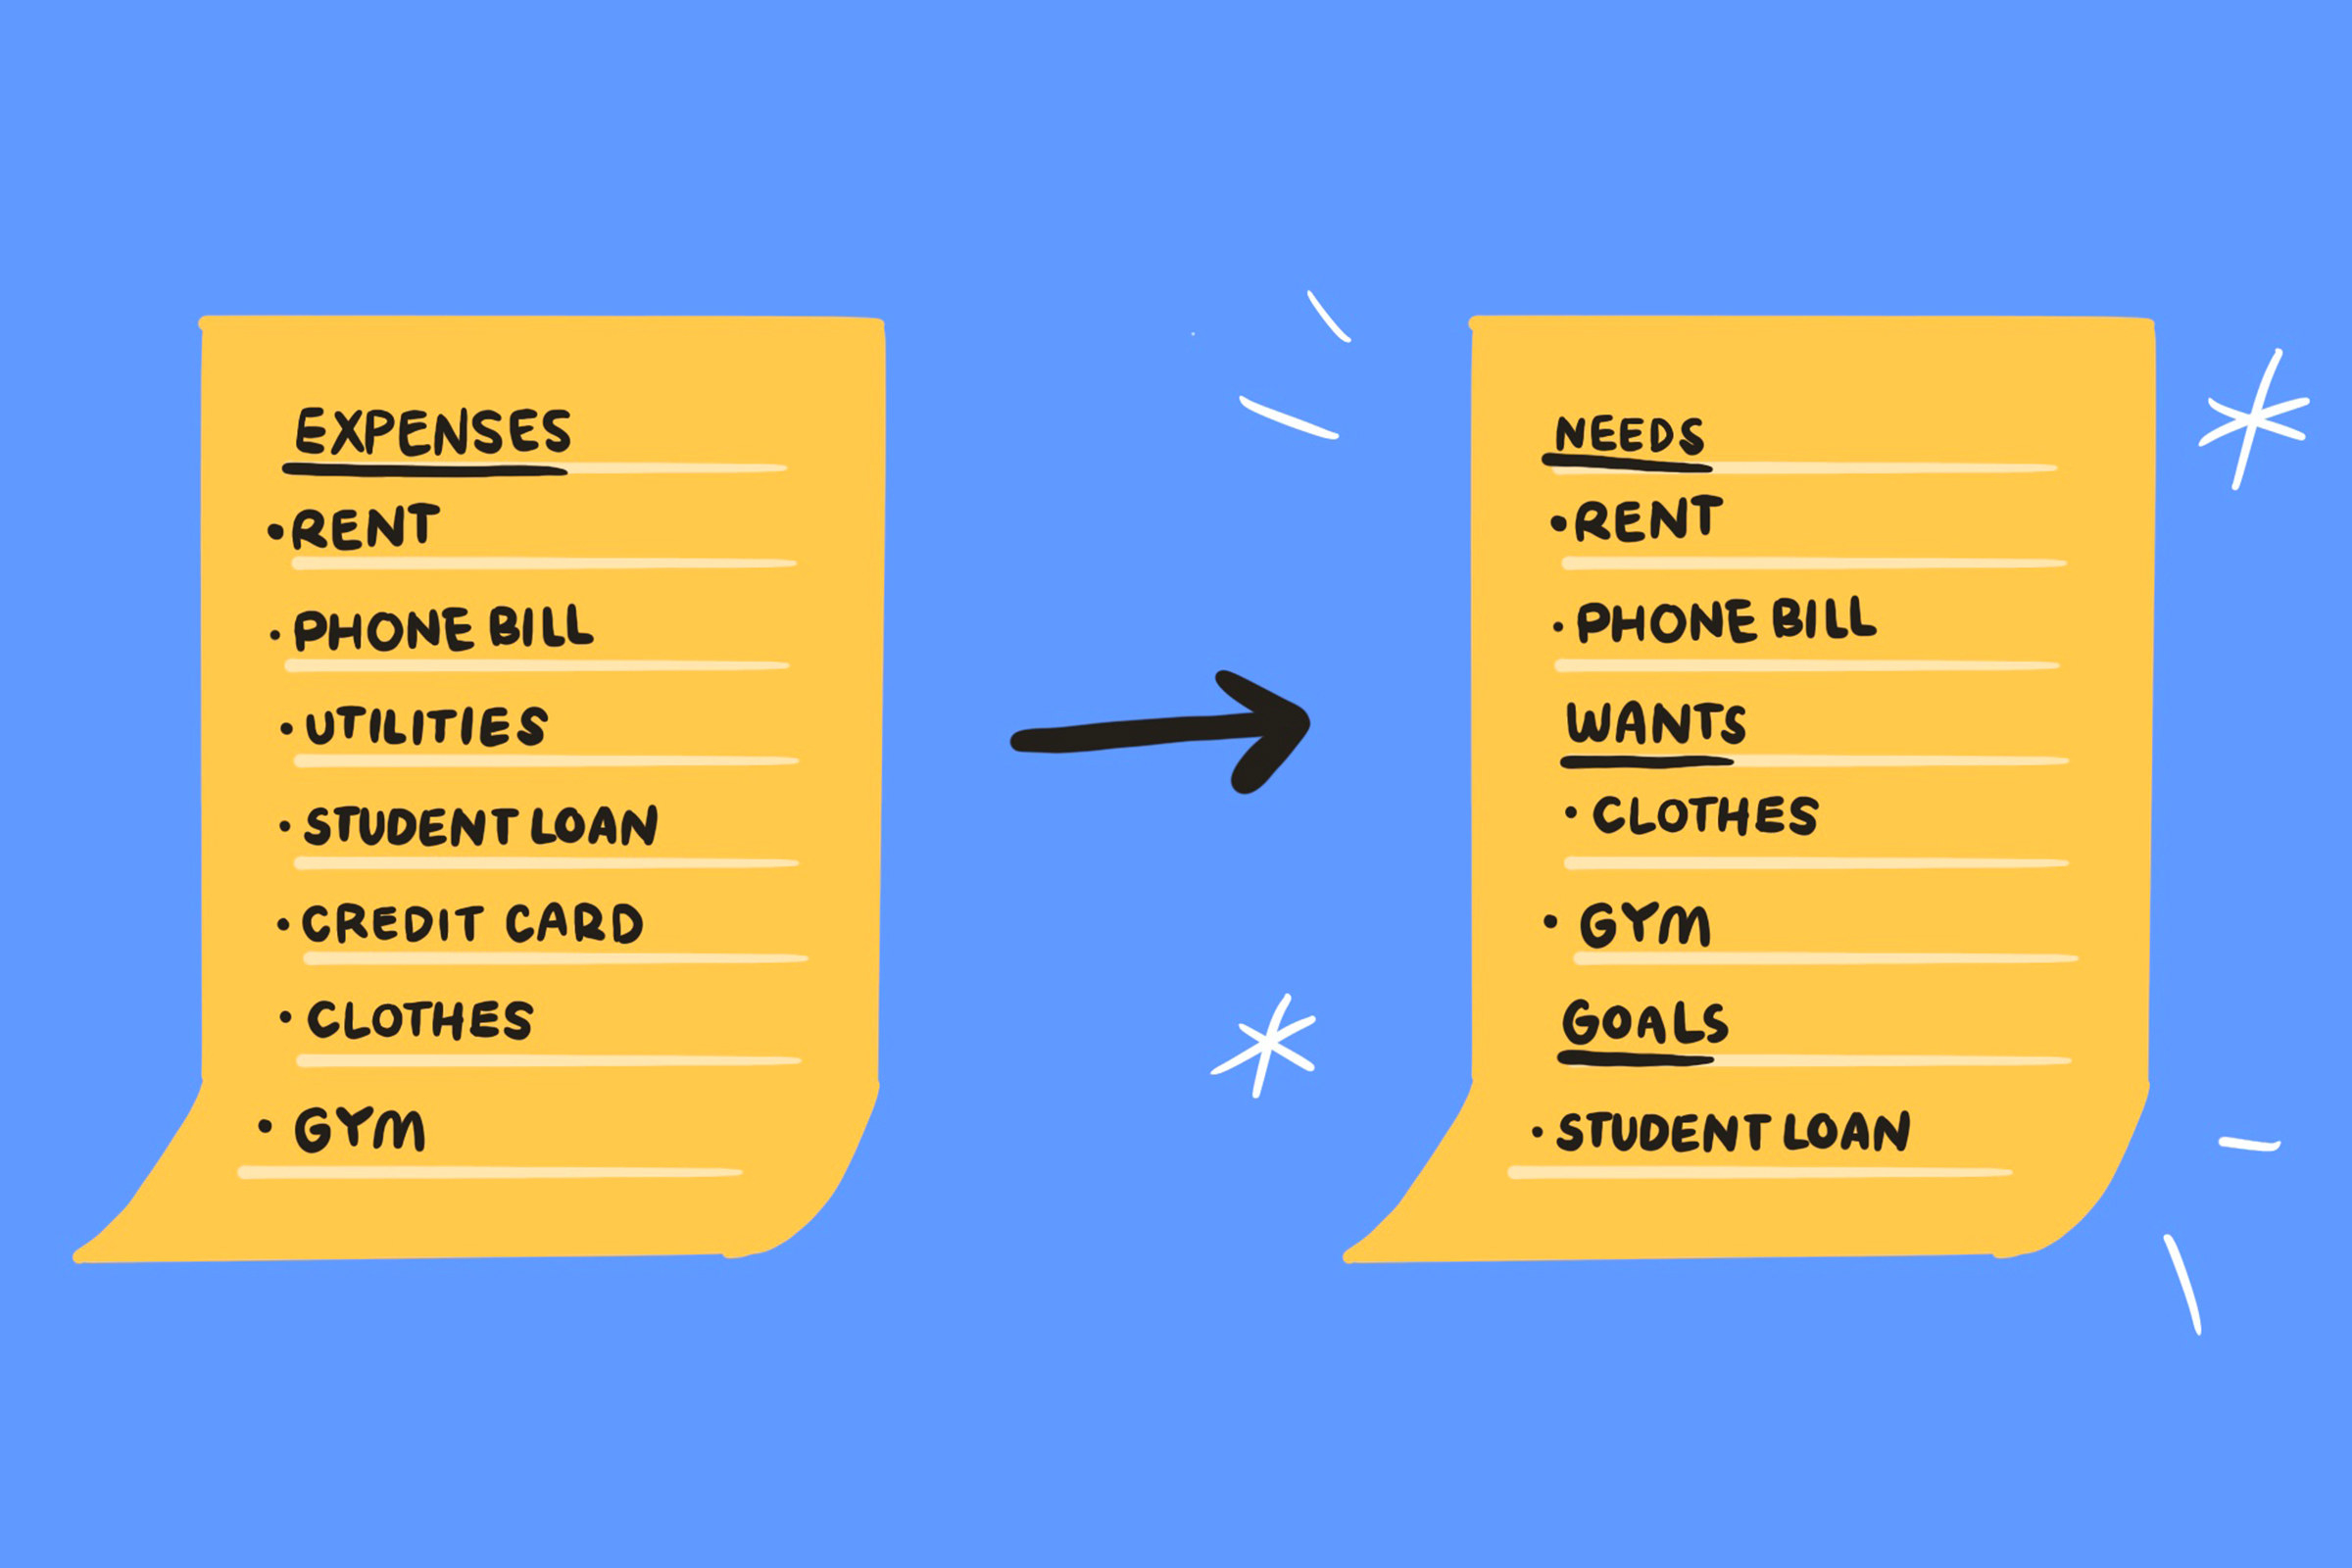 List of expenses divided into the categories needs, wants, and goals